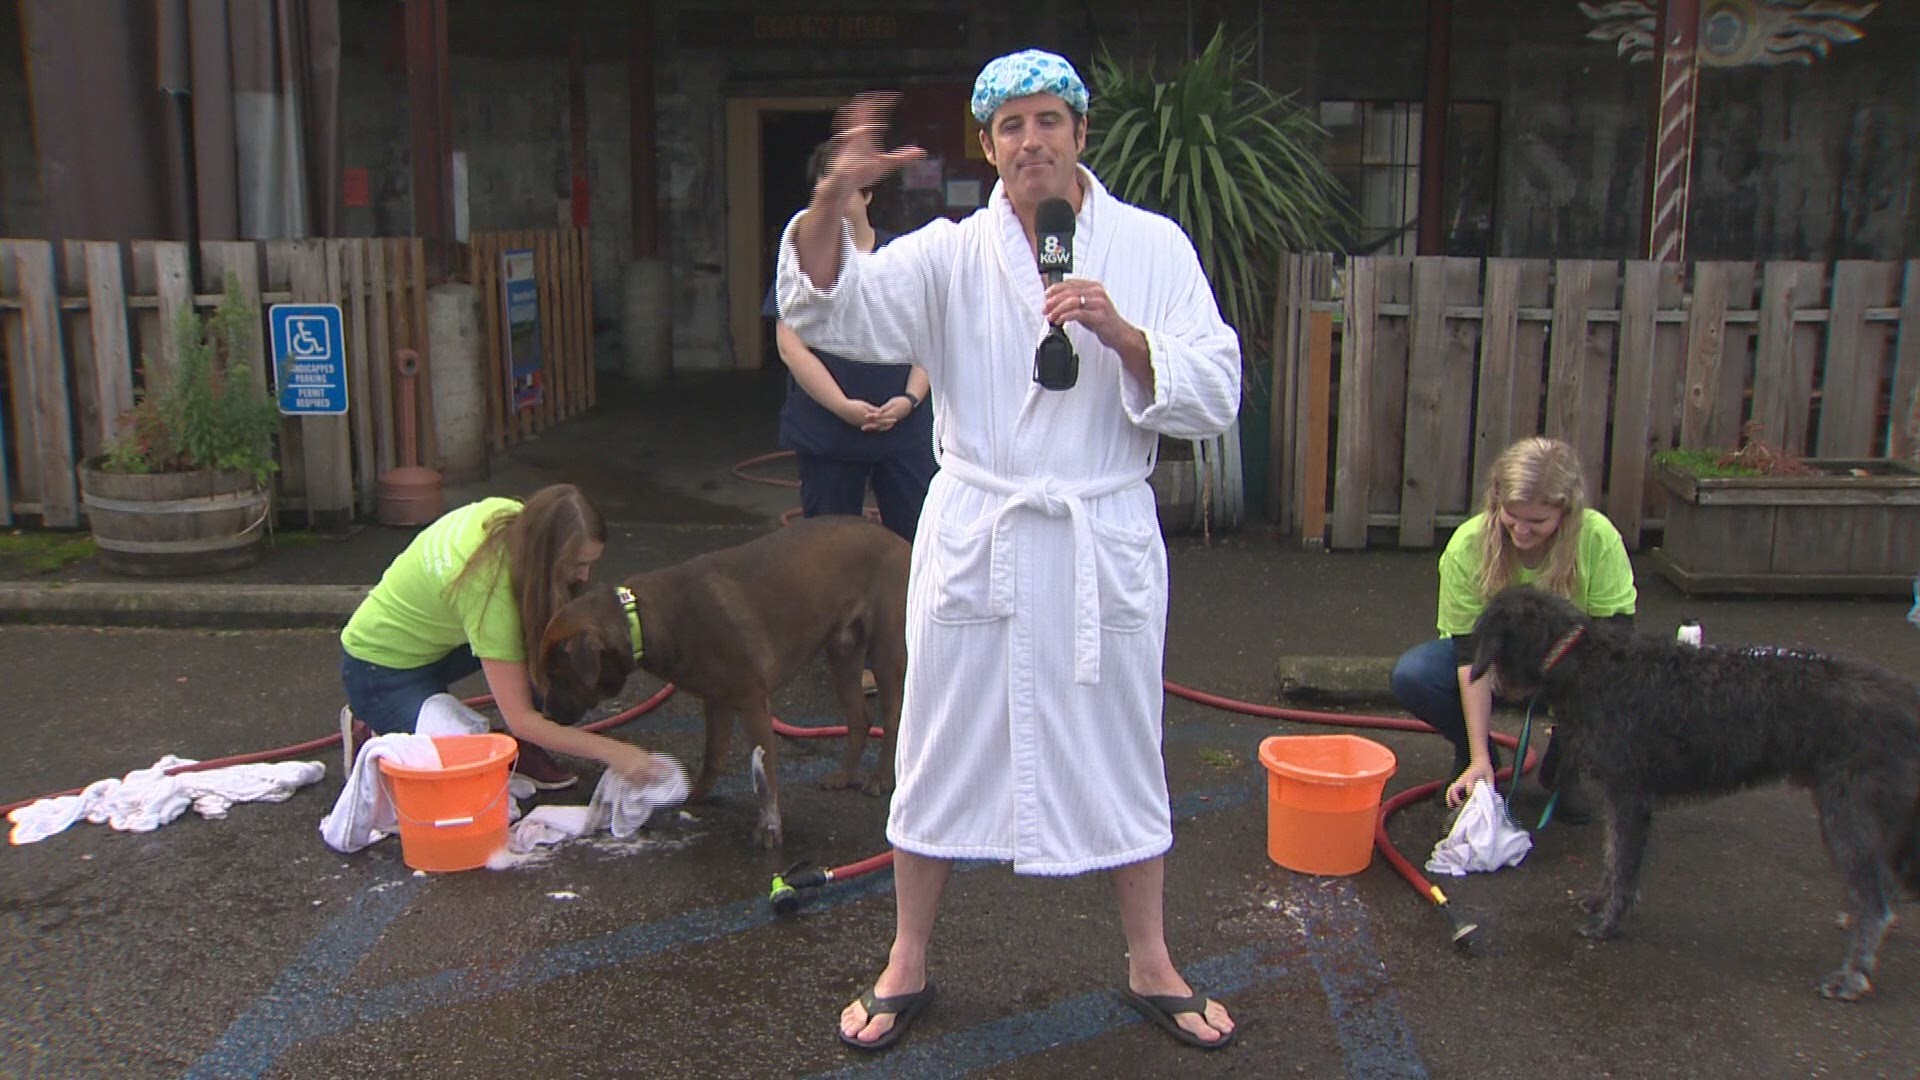 Drew Carney previews the 25th annual Dogtoberfest dog wash. The event raises money for the DoveLewis Blood Bank.